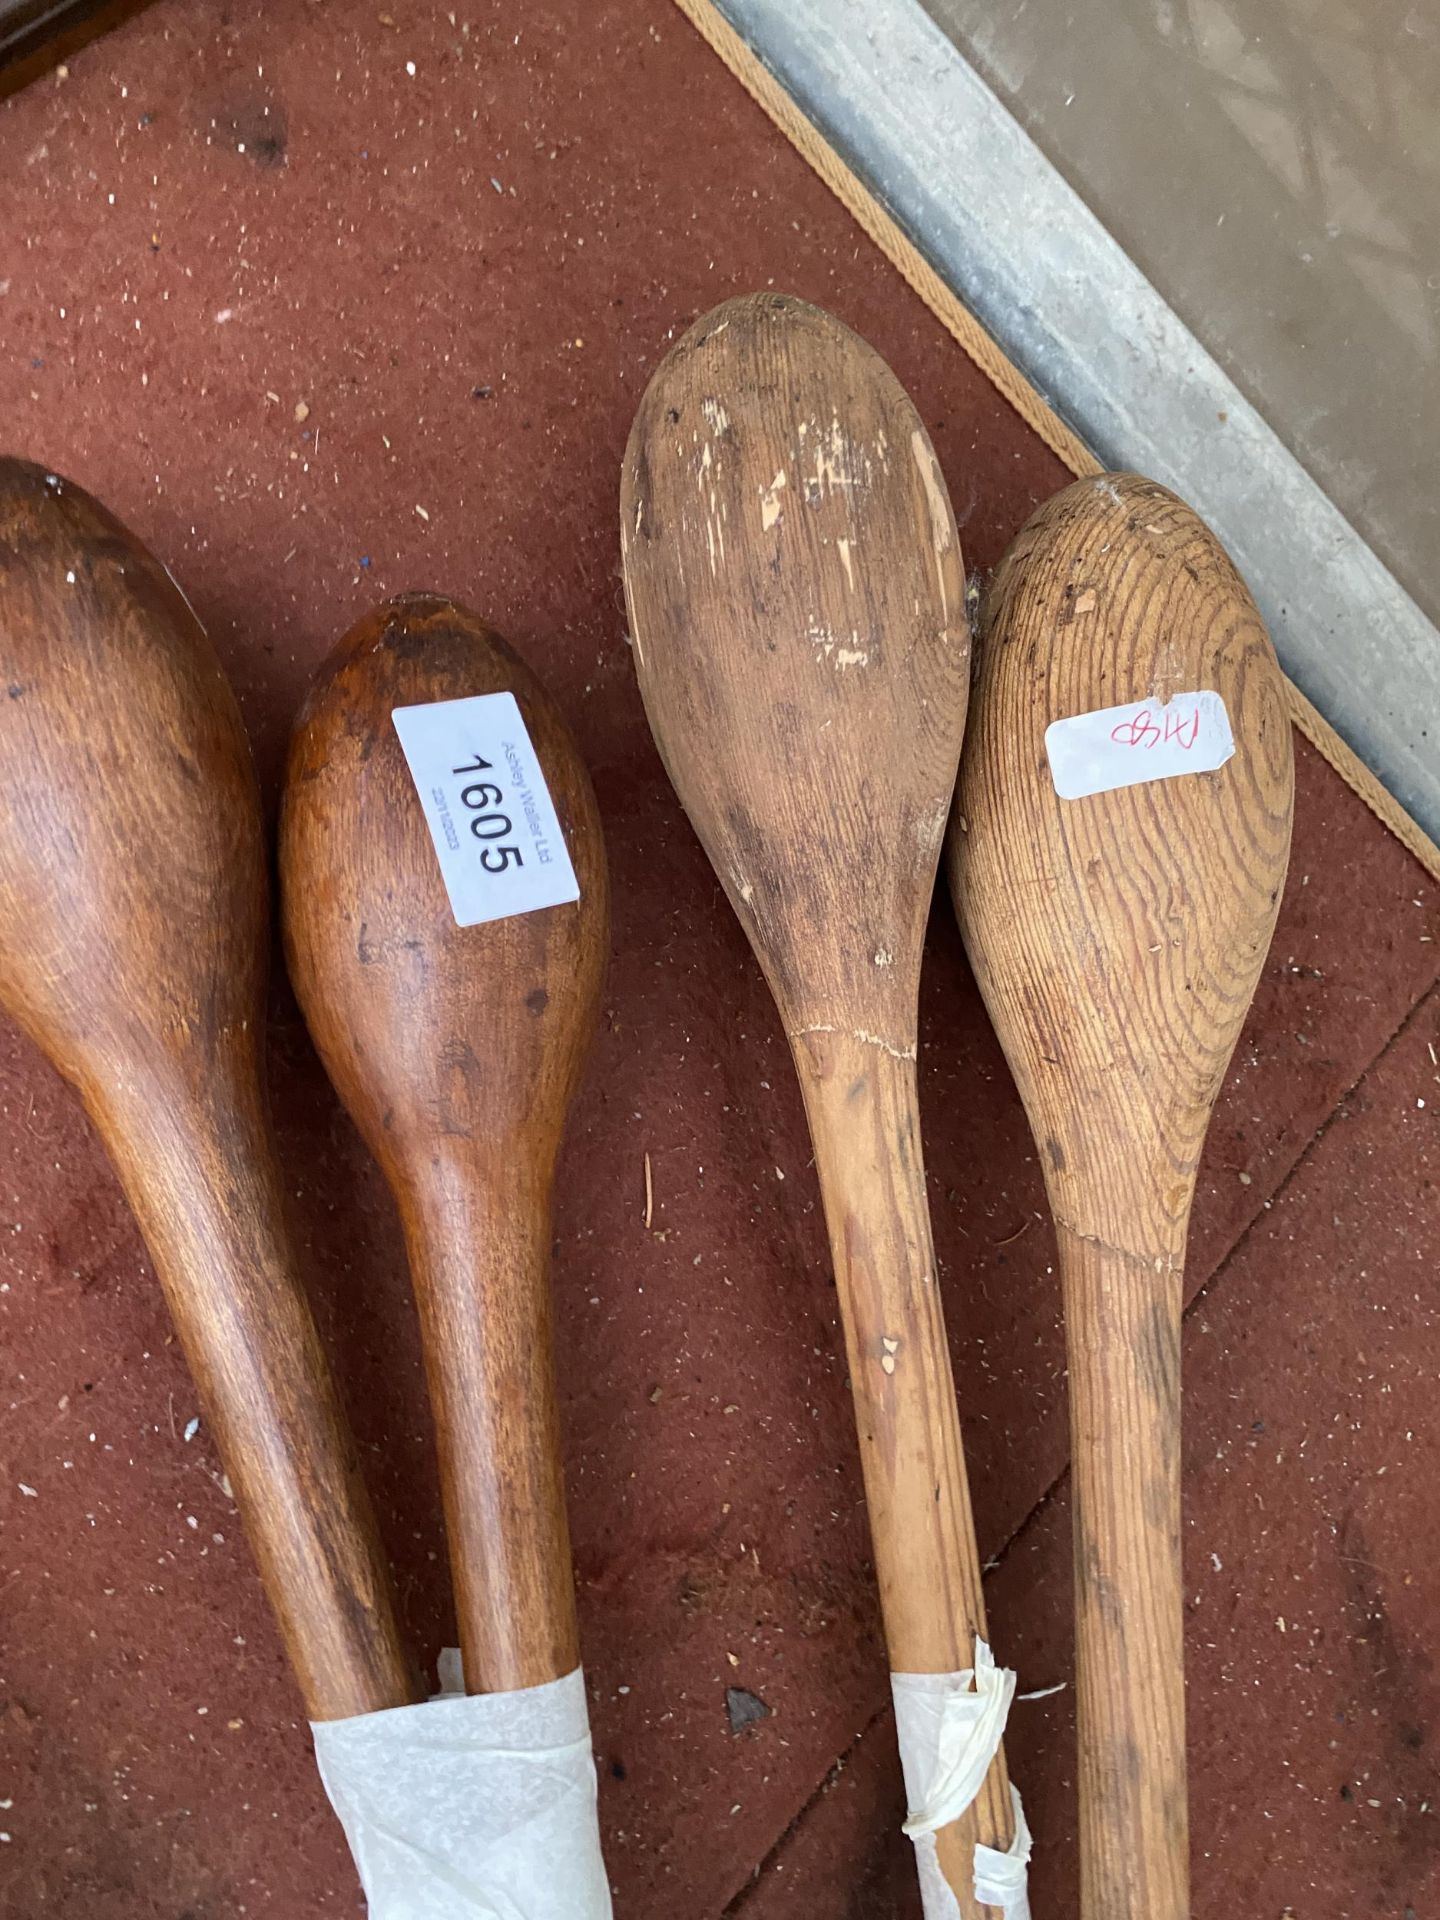 TWO PAIRS OF MID CENTURY WOODEN JUGGLING CLUBS - Image 2 of 2